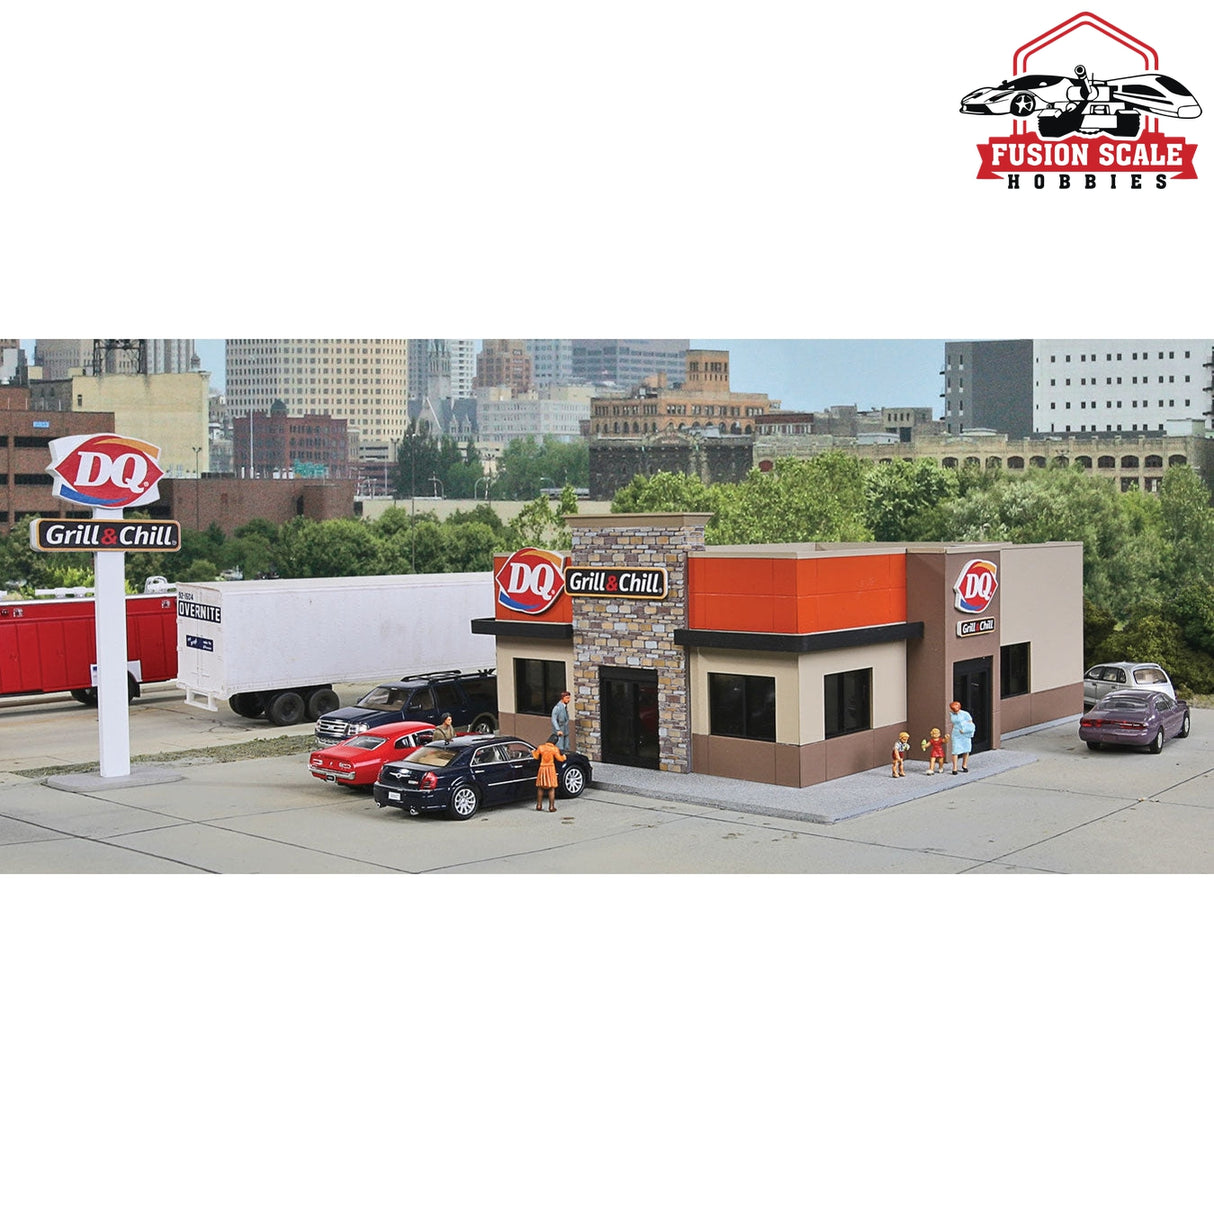 Walthers Cornerstone HO Scale DQ Grill & Chill(R) Kit 71/4 x 53/8 x 23/4" 18.4 x 13.6 x 6.9cm